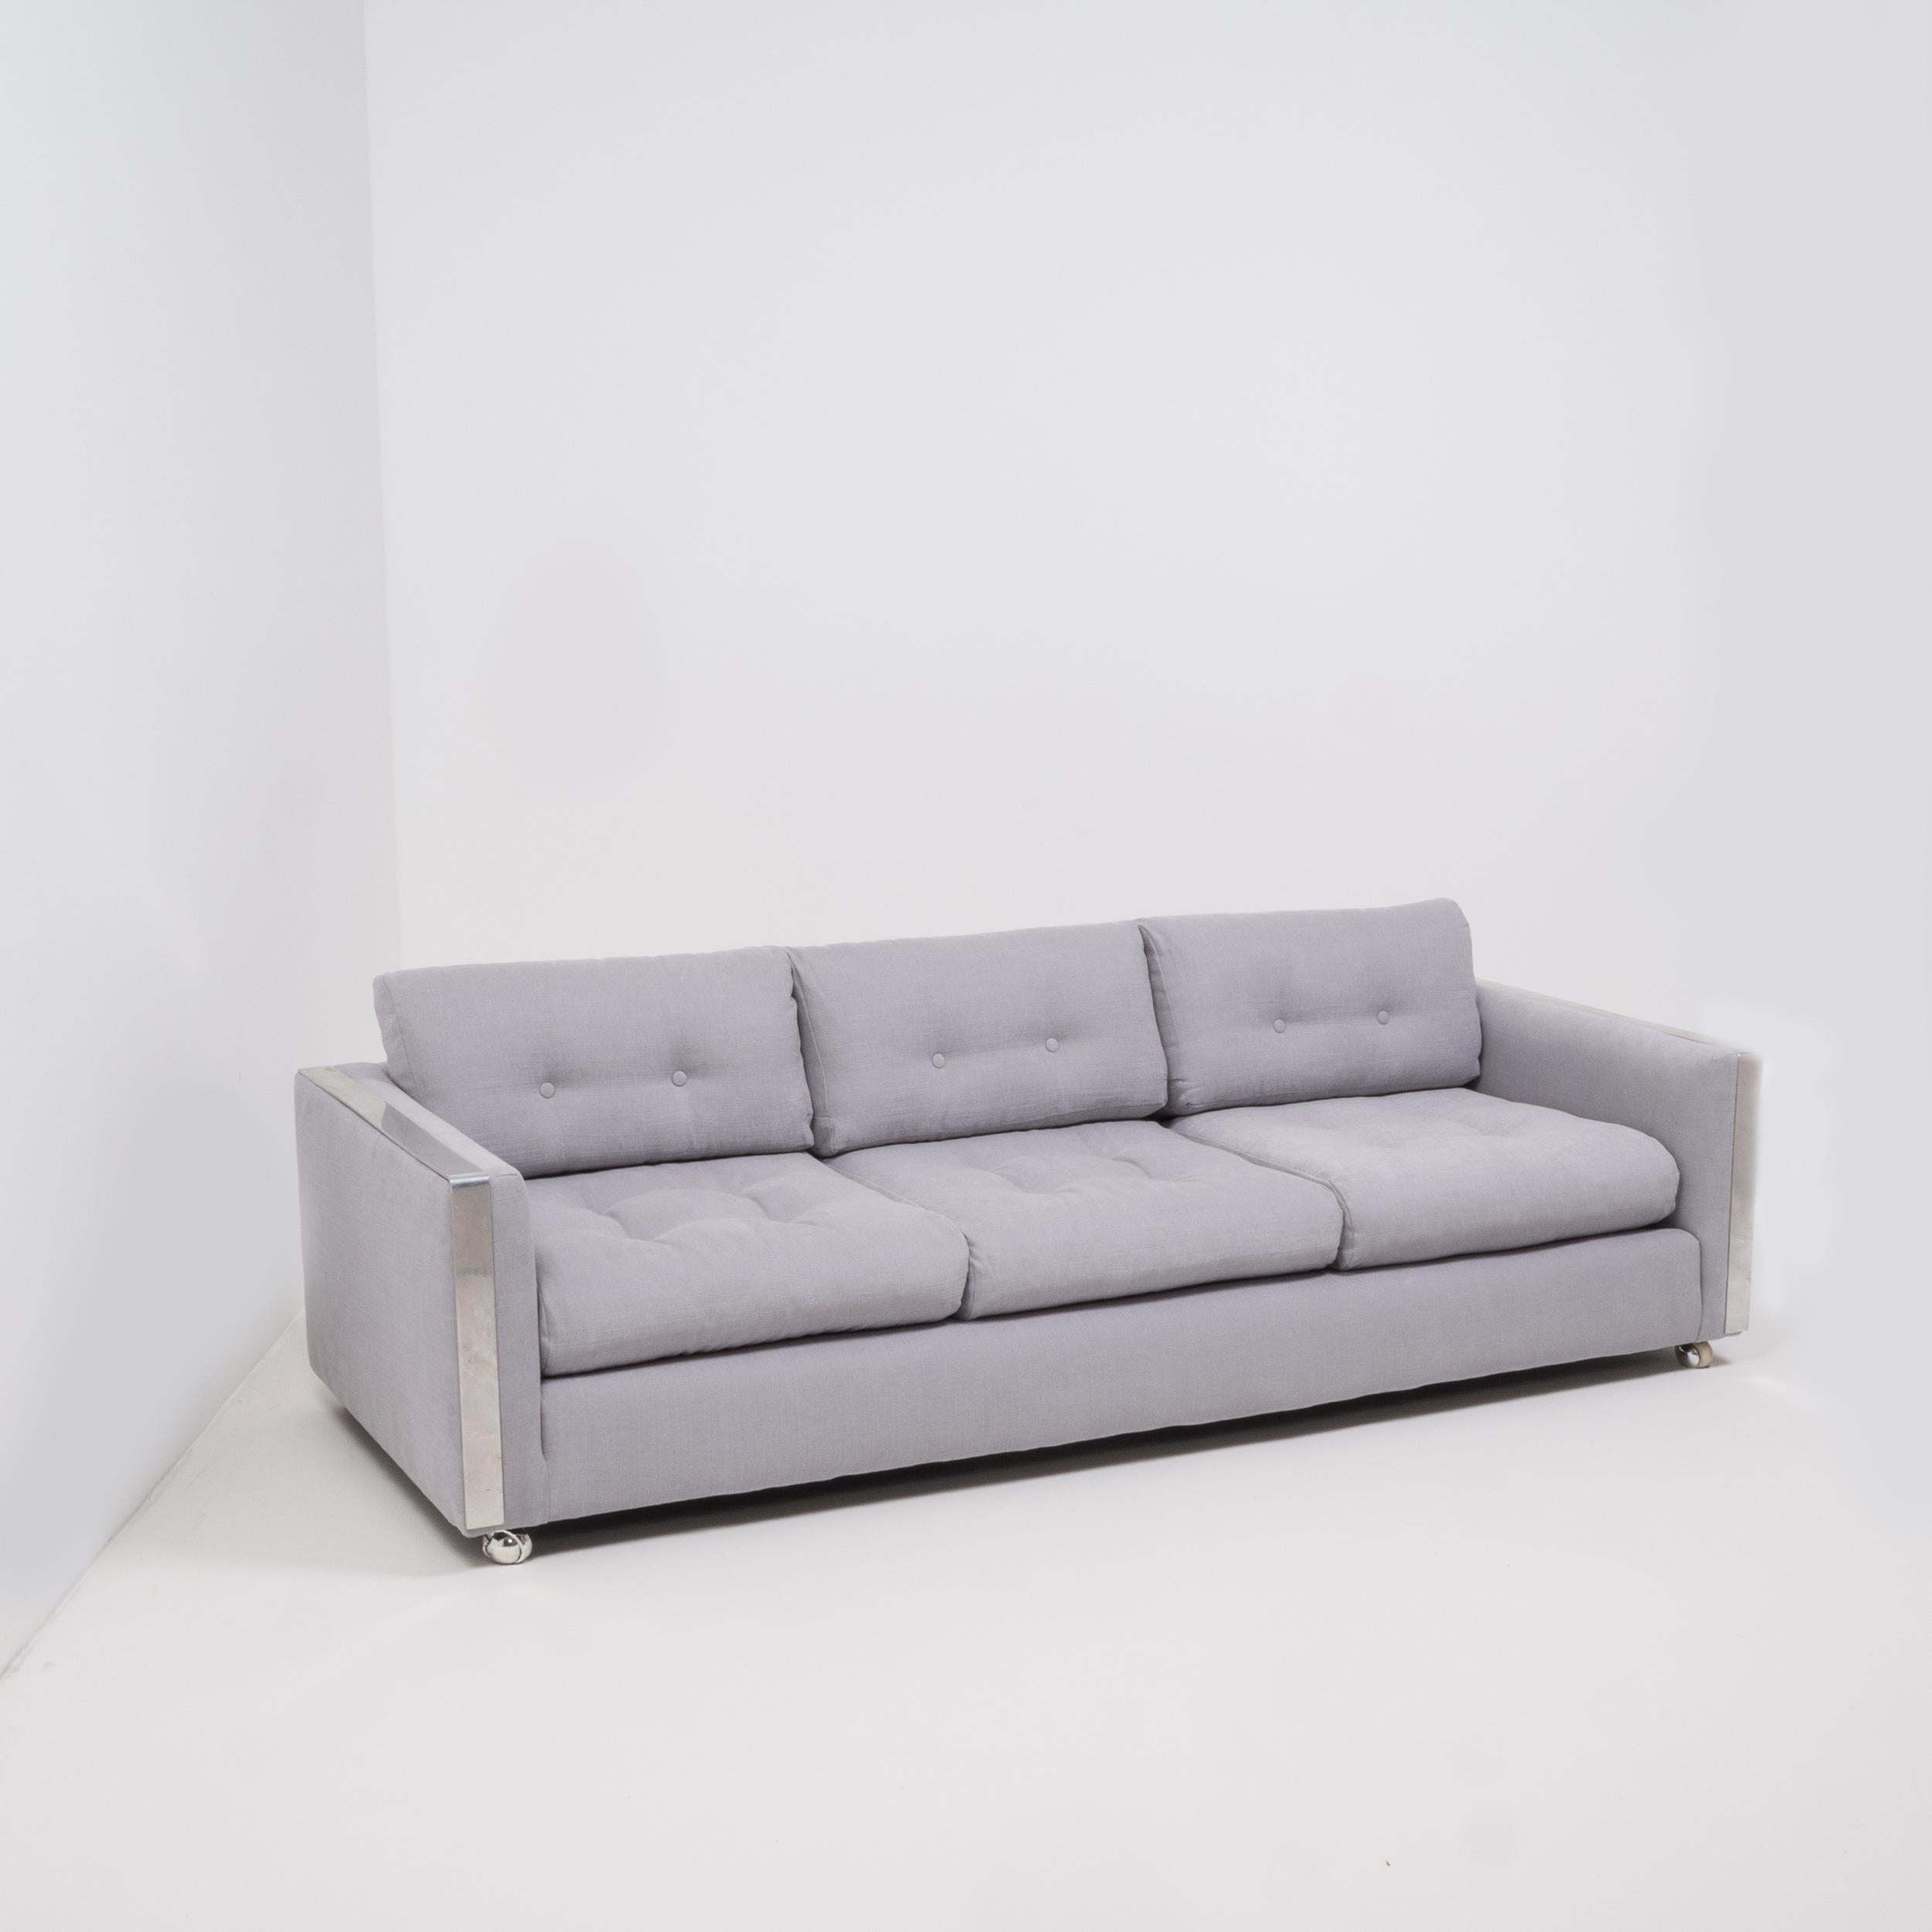 Designed in the style of Milo Baughman, this sleek three-seat sofa has been newly upholstered in a sumptuously soft and airy grey Linara fabric that compliments the chrome detailing perfectly.
 
With its clean lines and cool aesthetic it combines